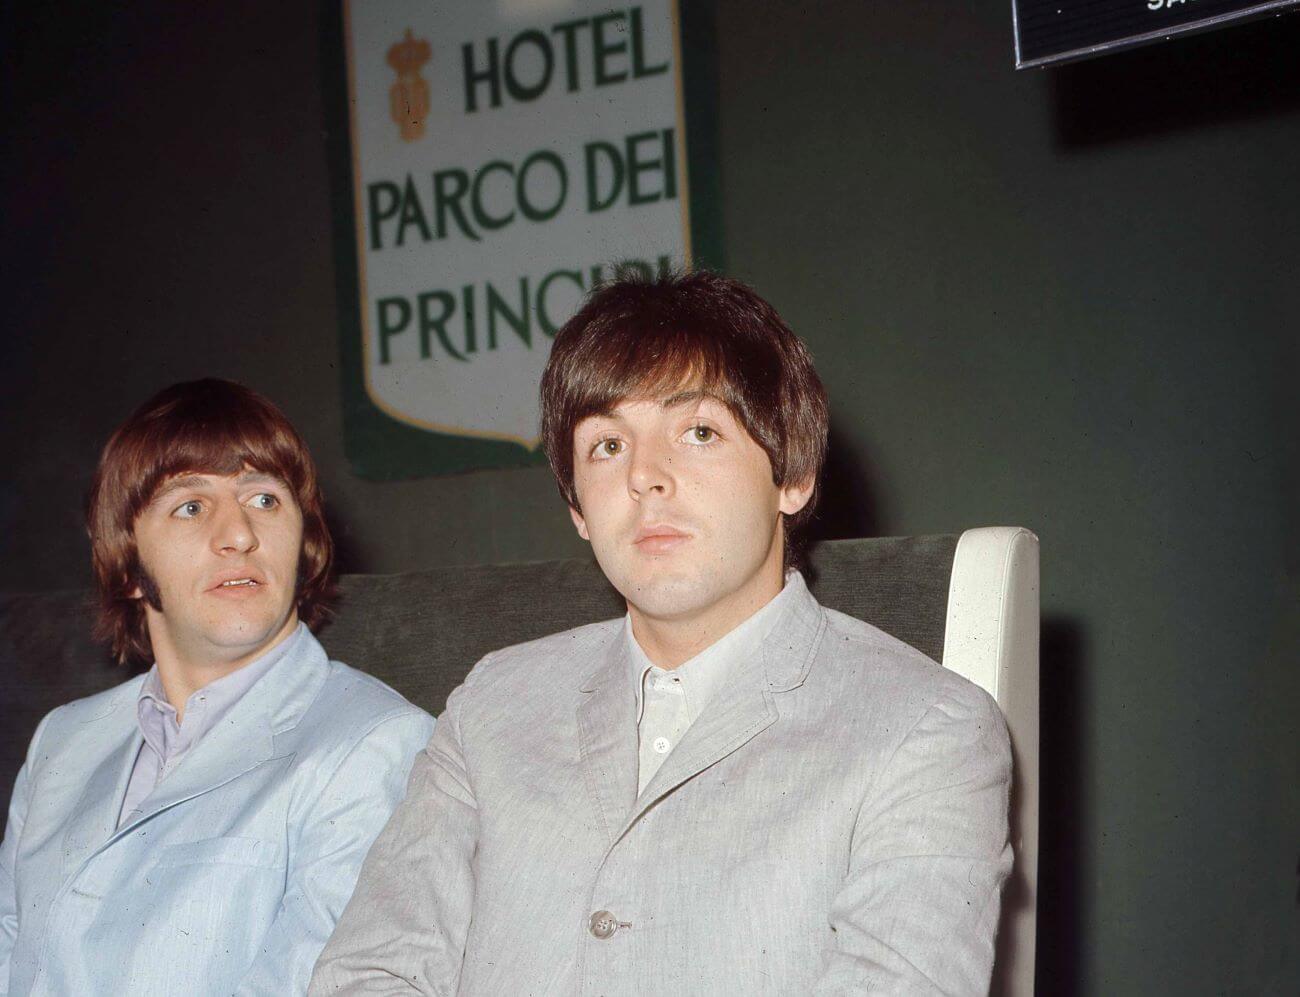 Ringo Starr and Paul McCartney sit at a table in front of a sign for the Hotel Parco dei Principi.